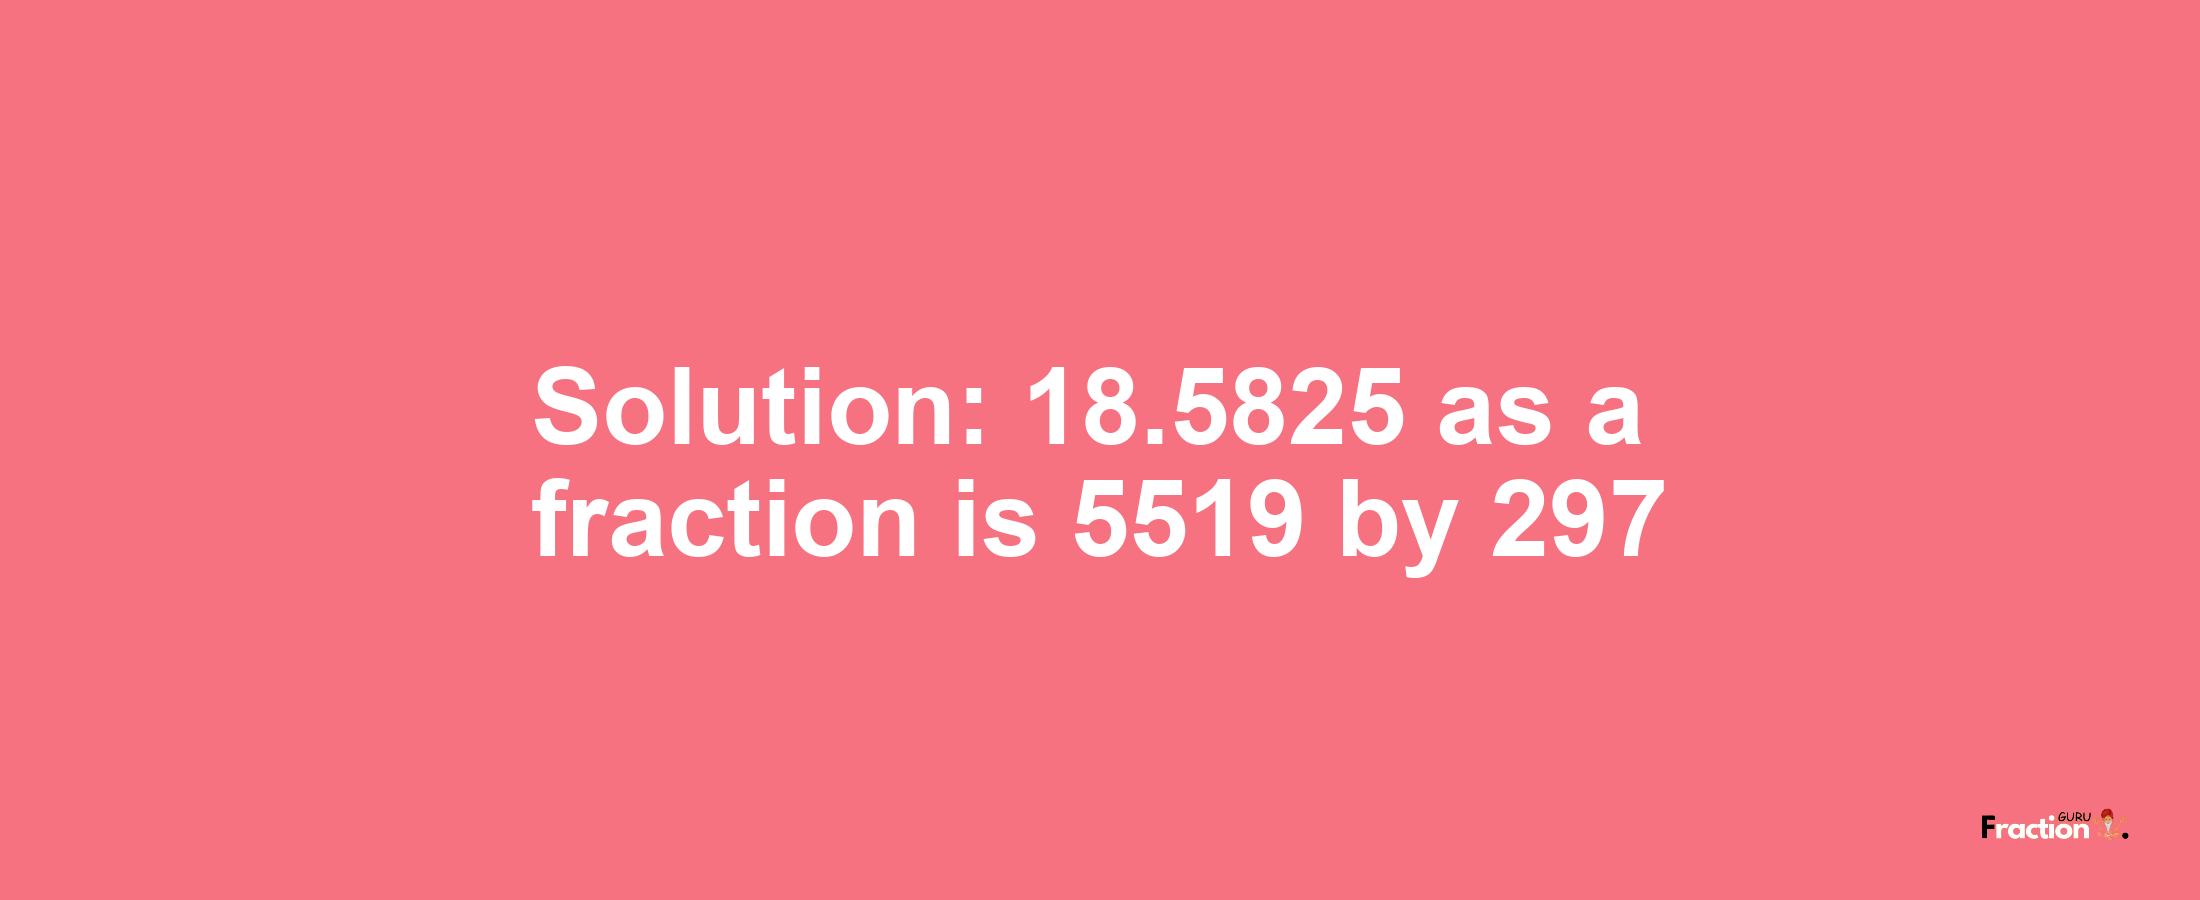 Solution:18.5825 as a fraction is 5519/297